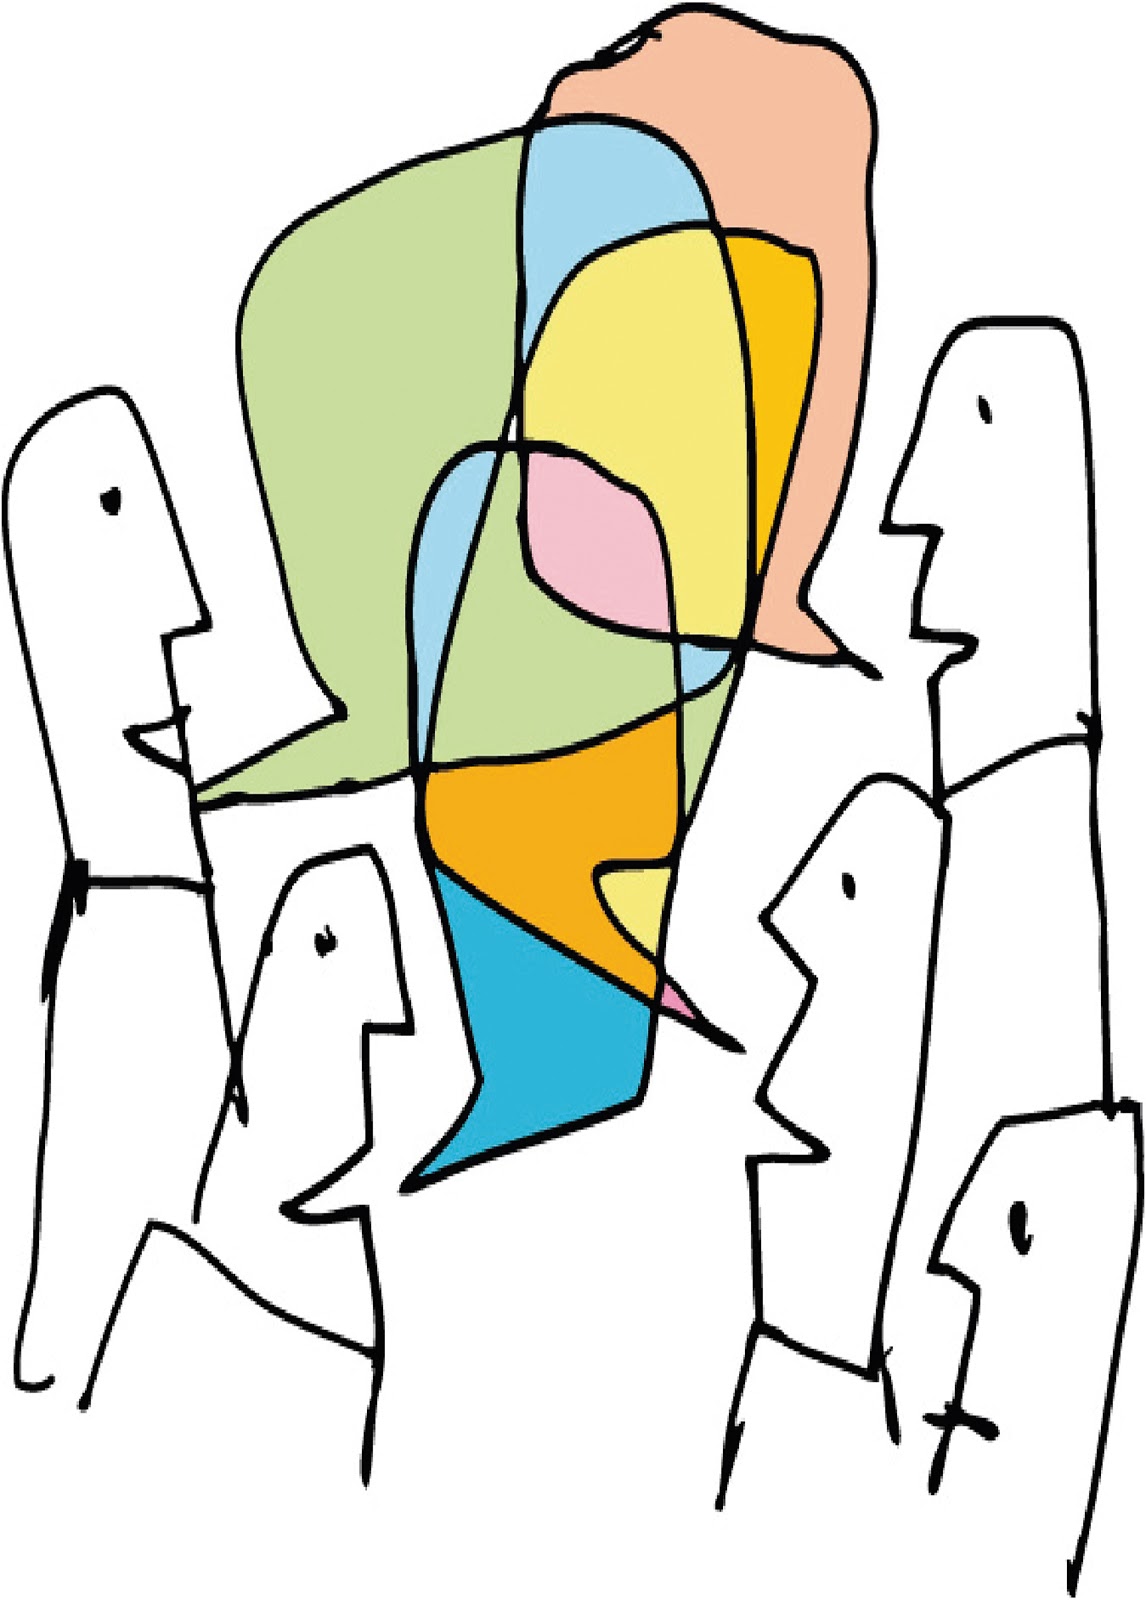 People speaking different languages clipart